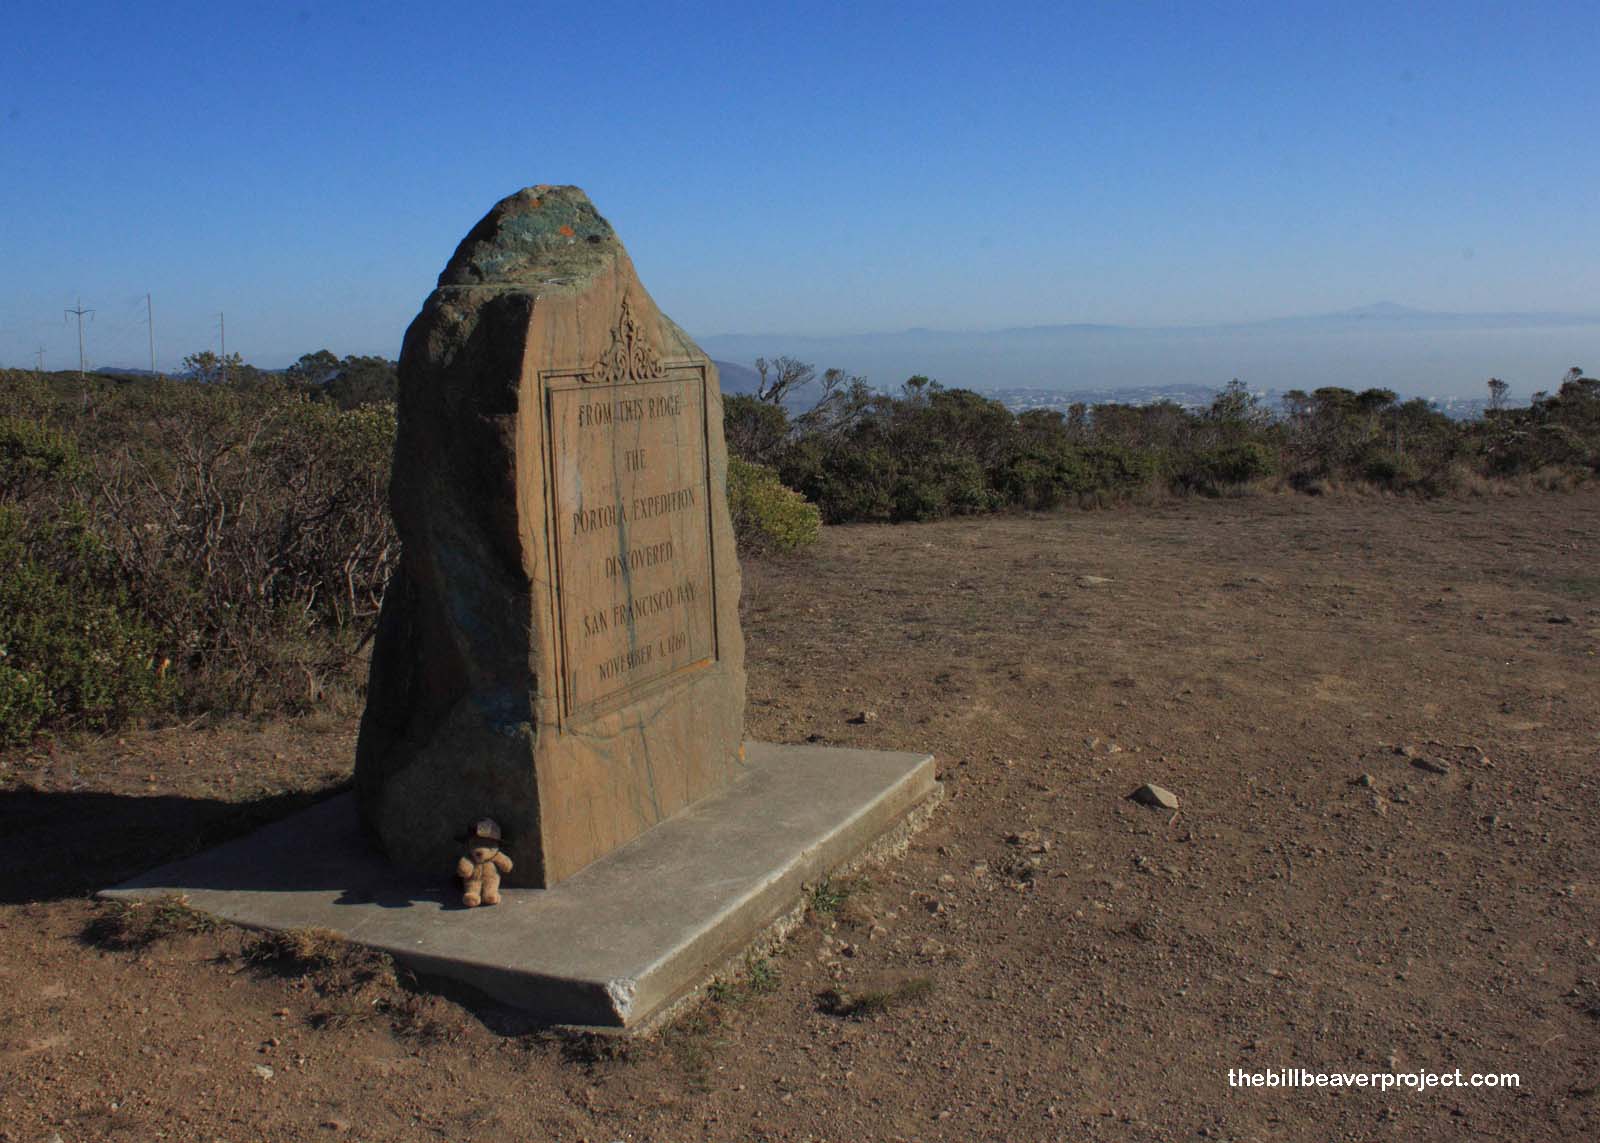 Site of the Discovery of San Francisco Bay